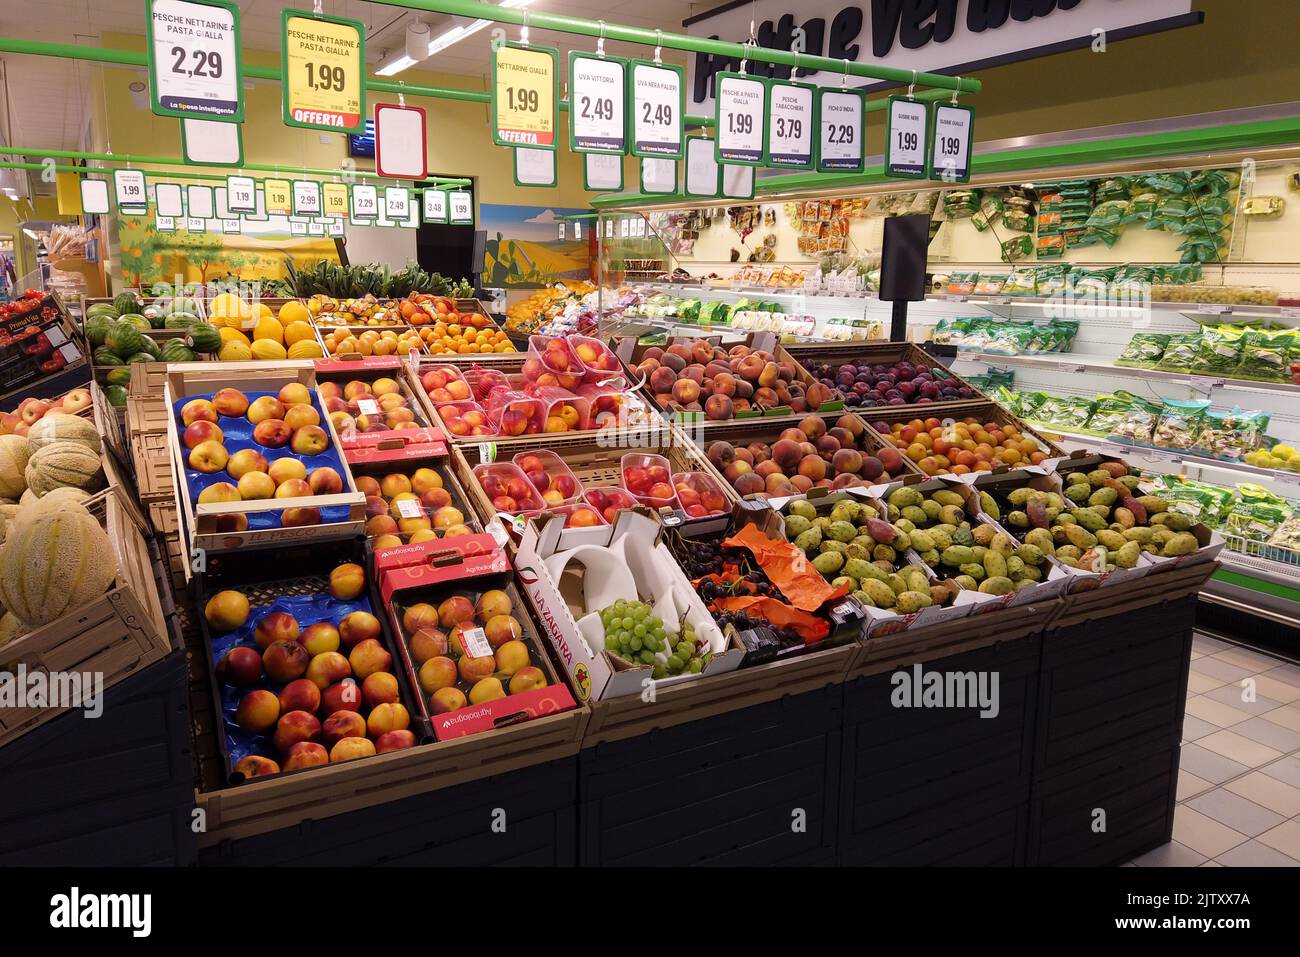 Fossano, Italy - August 30, 2022: stalls with fruit and vegetables in italian supermarket Eurospin, summer fruit in boxes displayed for sale with pric Stock Photo